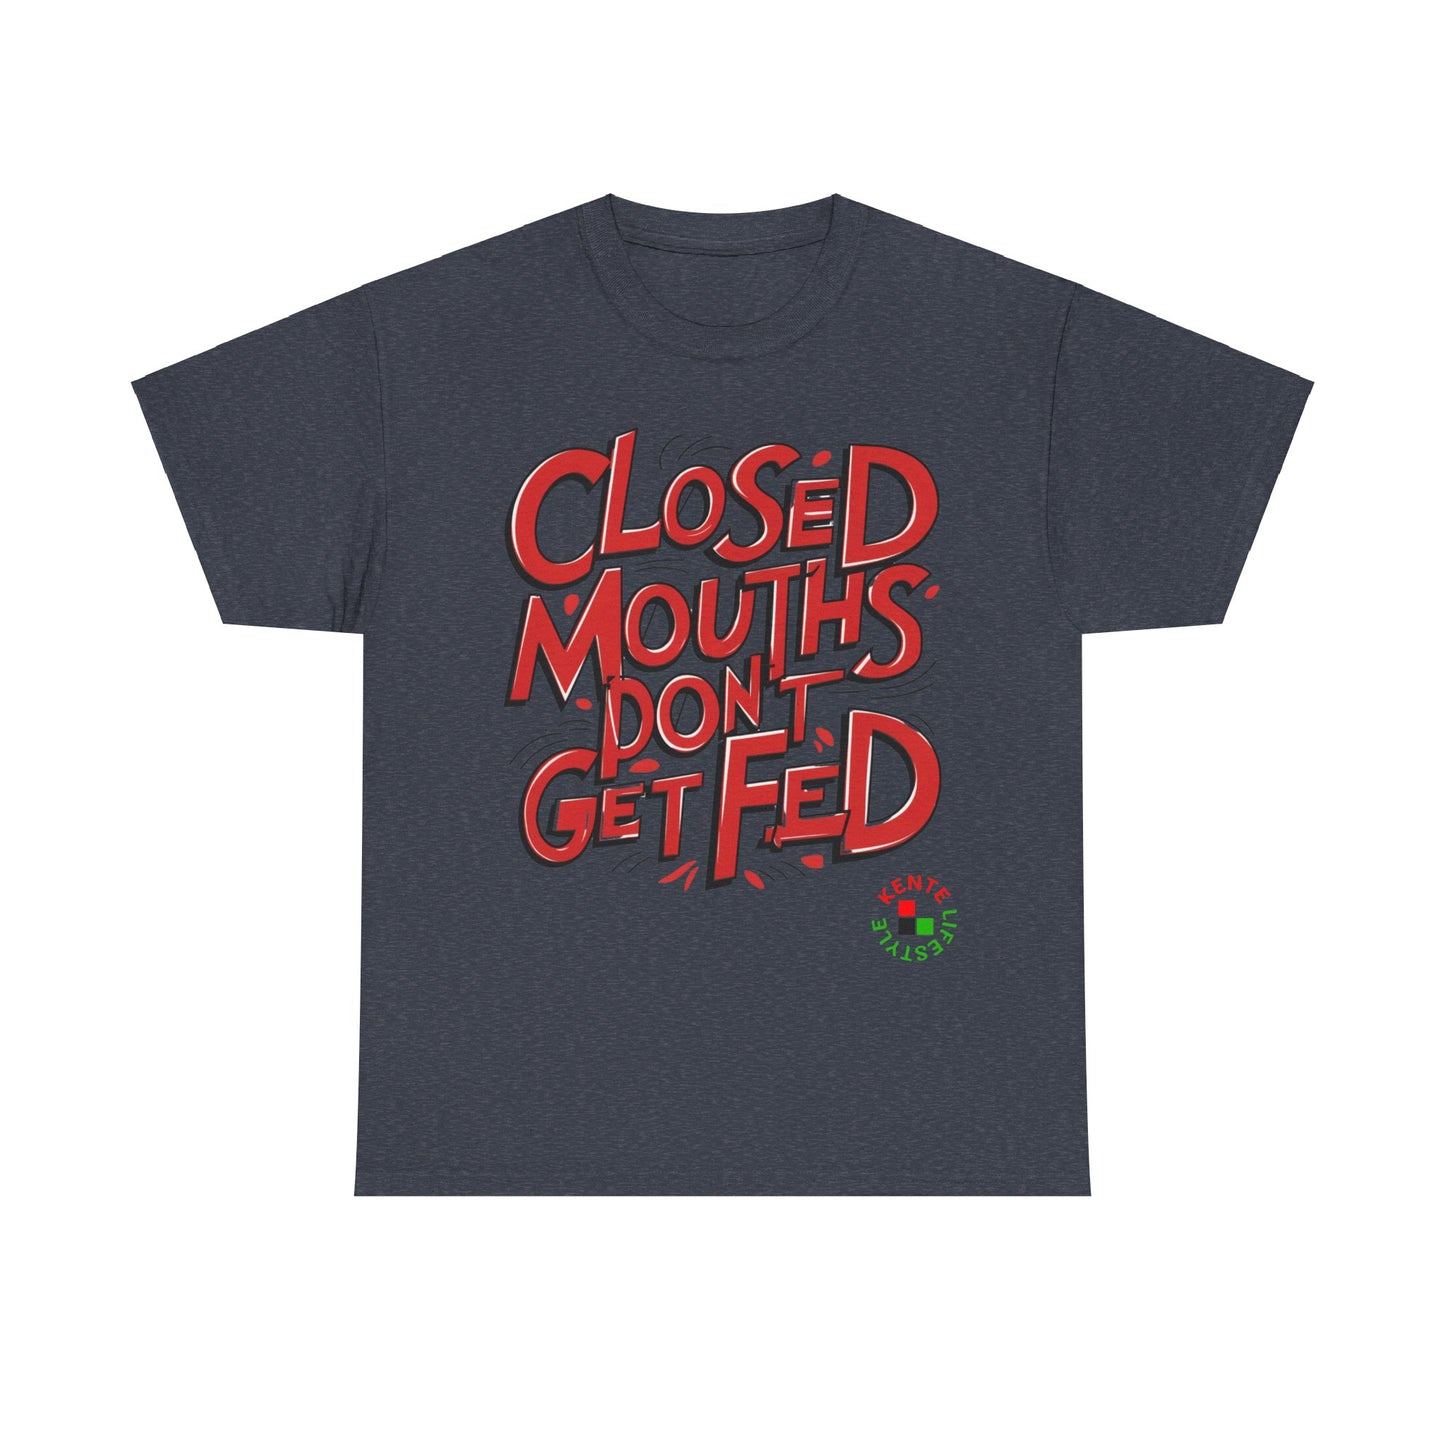 "Closed Mouths Don't Get Fed" -- T-shirt